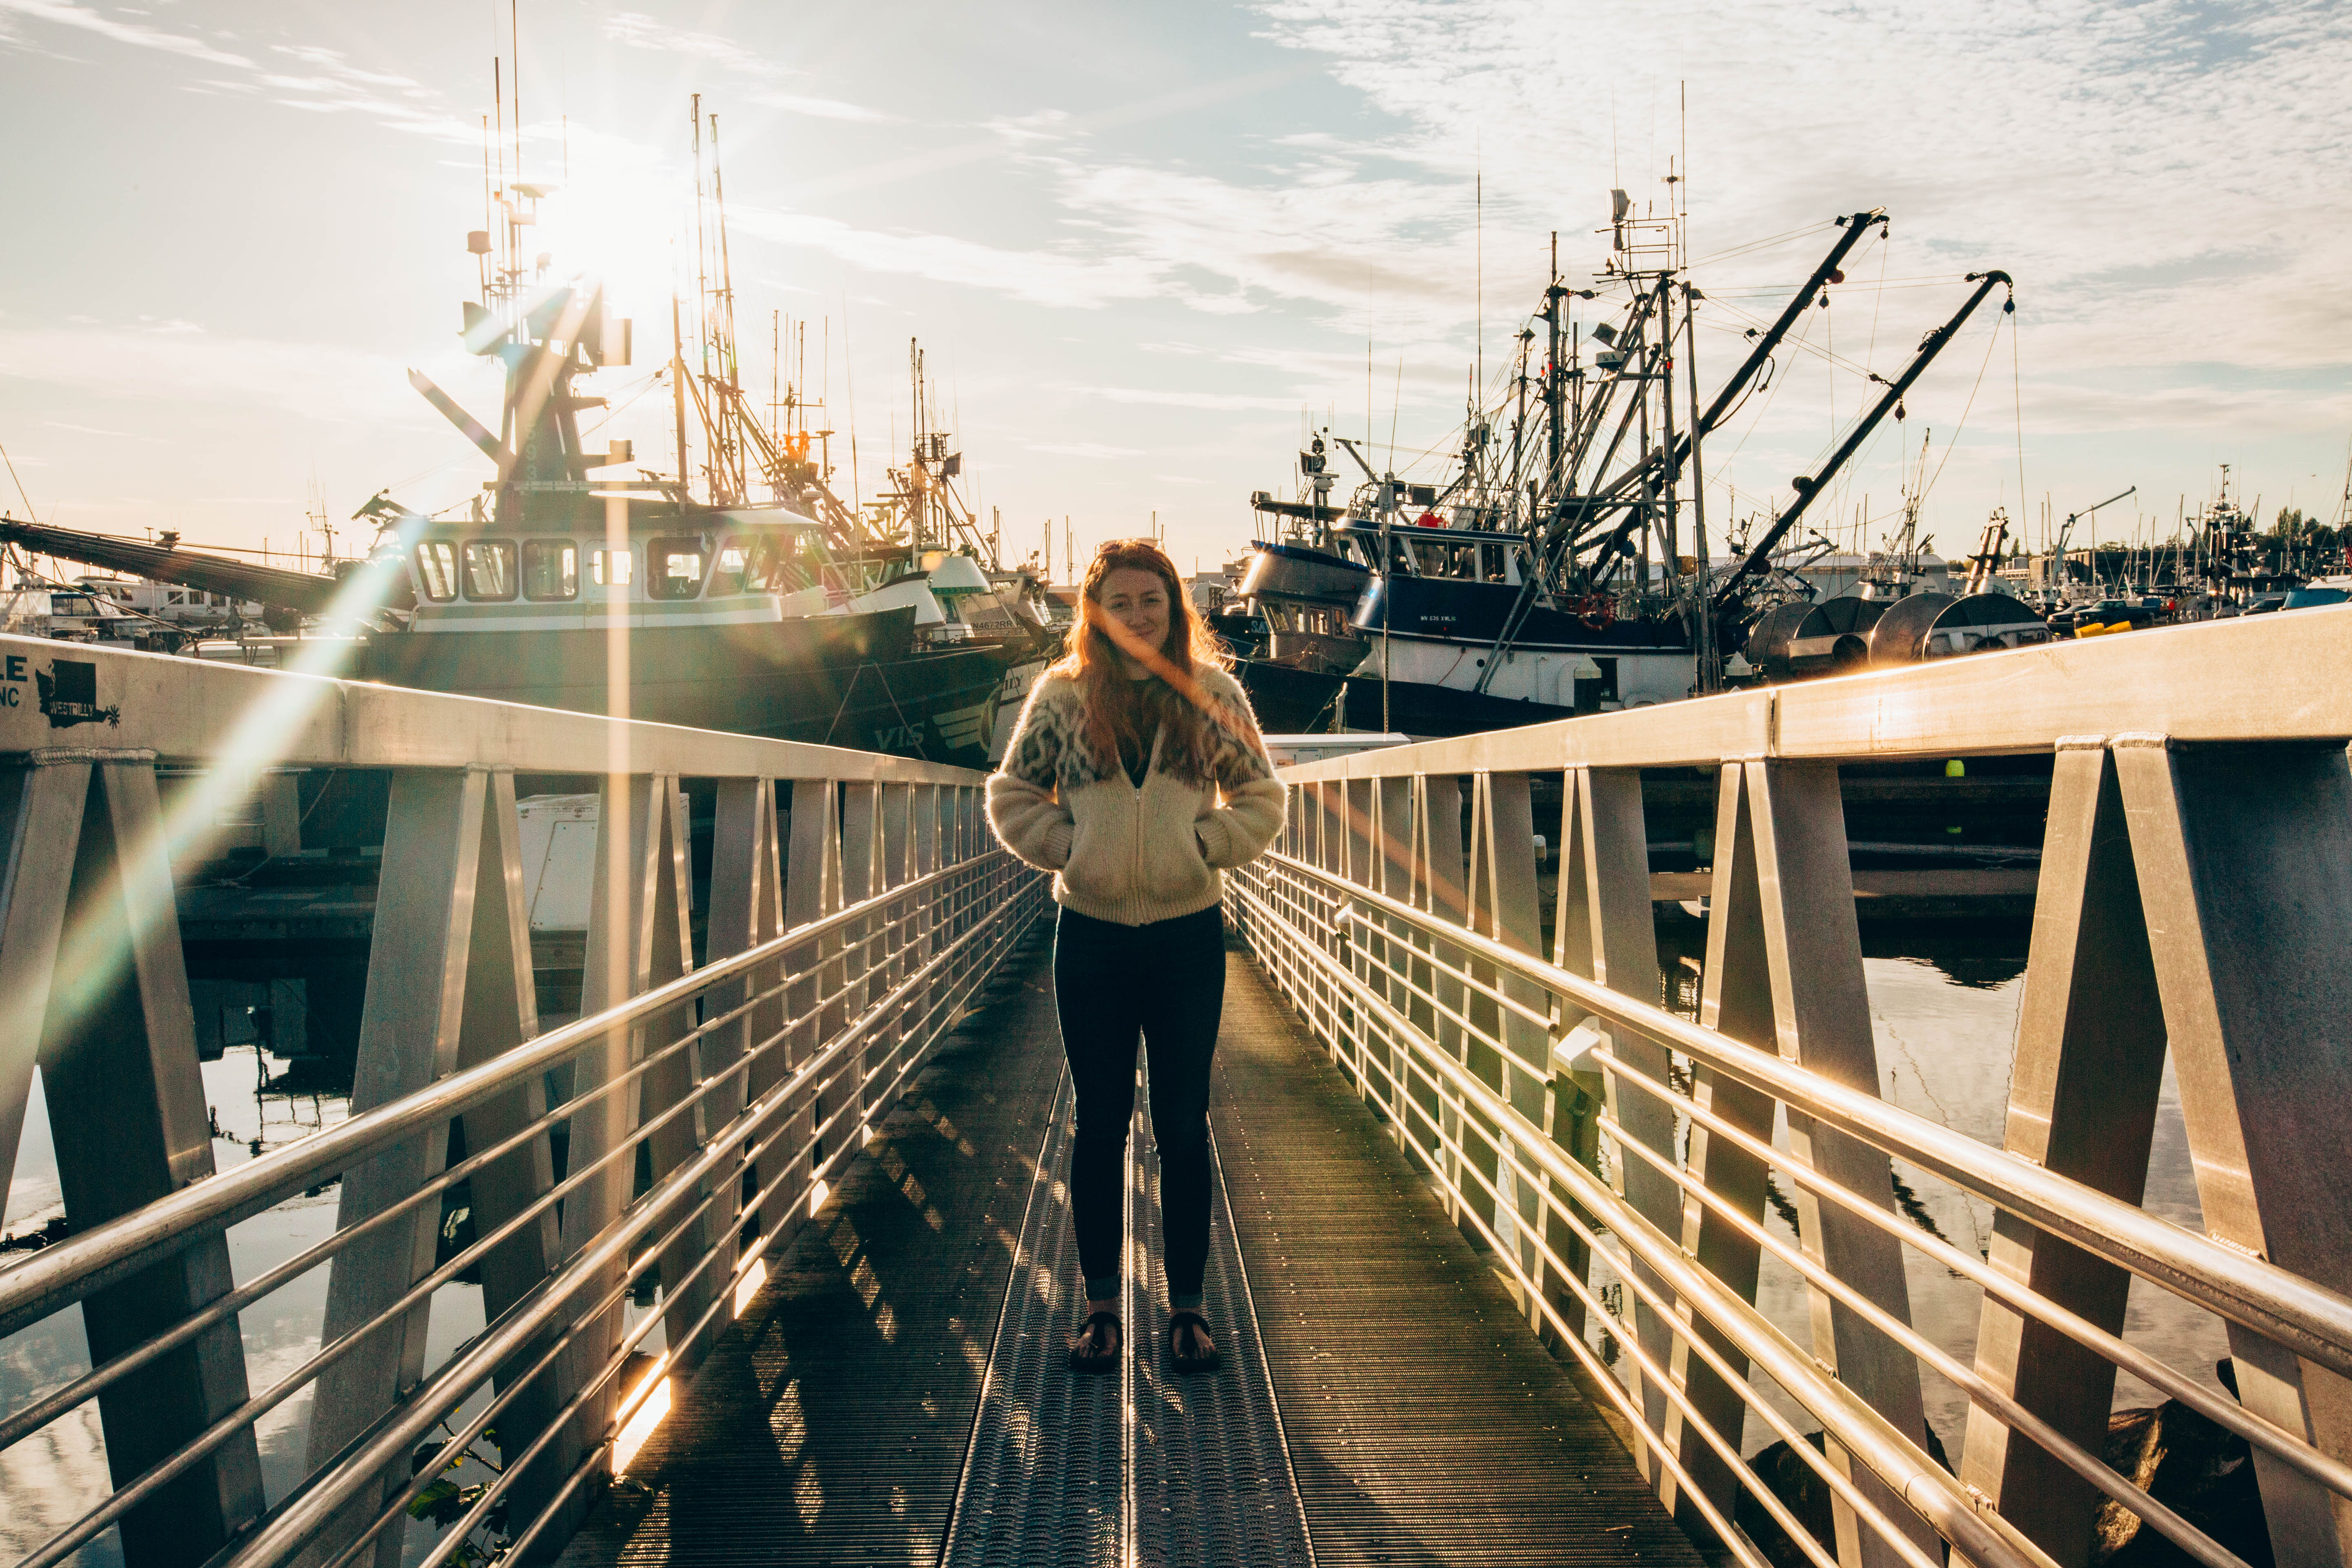 Elma stands on the dock ramp at Bellingham Marina on Tuesday, May 7, 2019. (Photo by Regan Bervar)